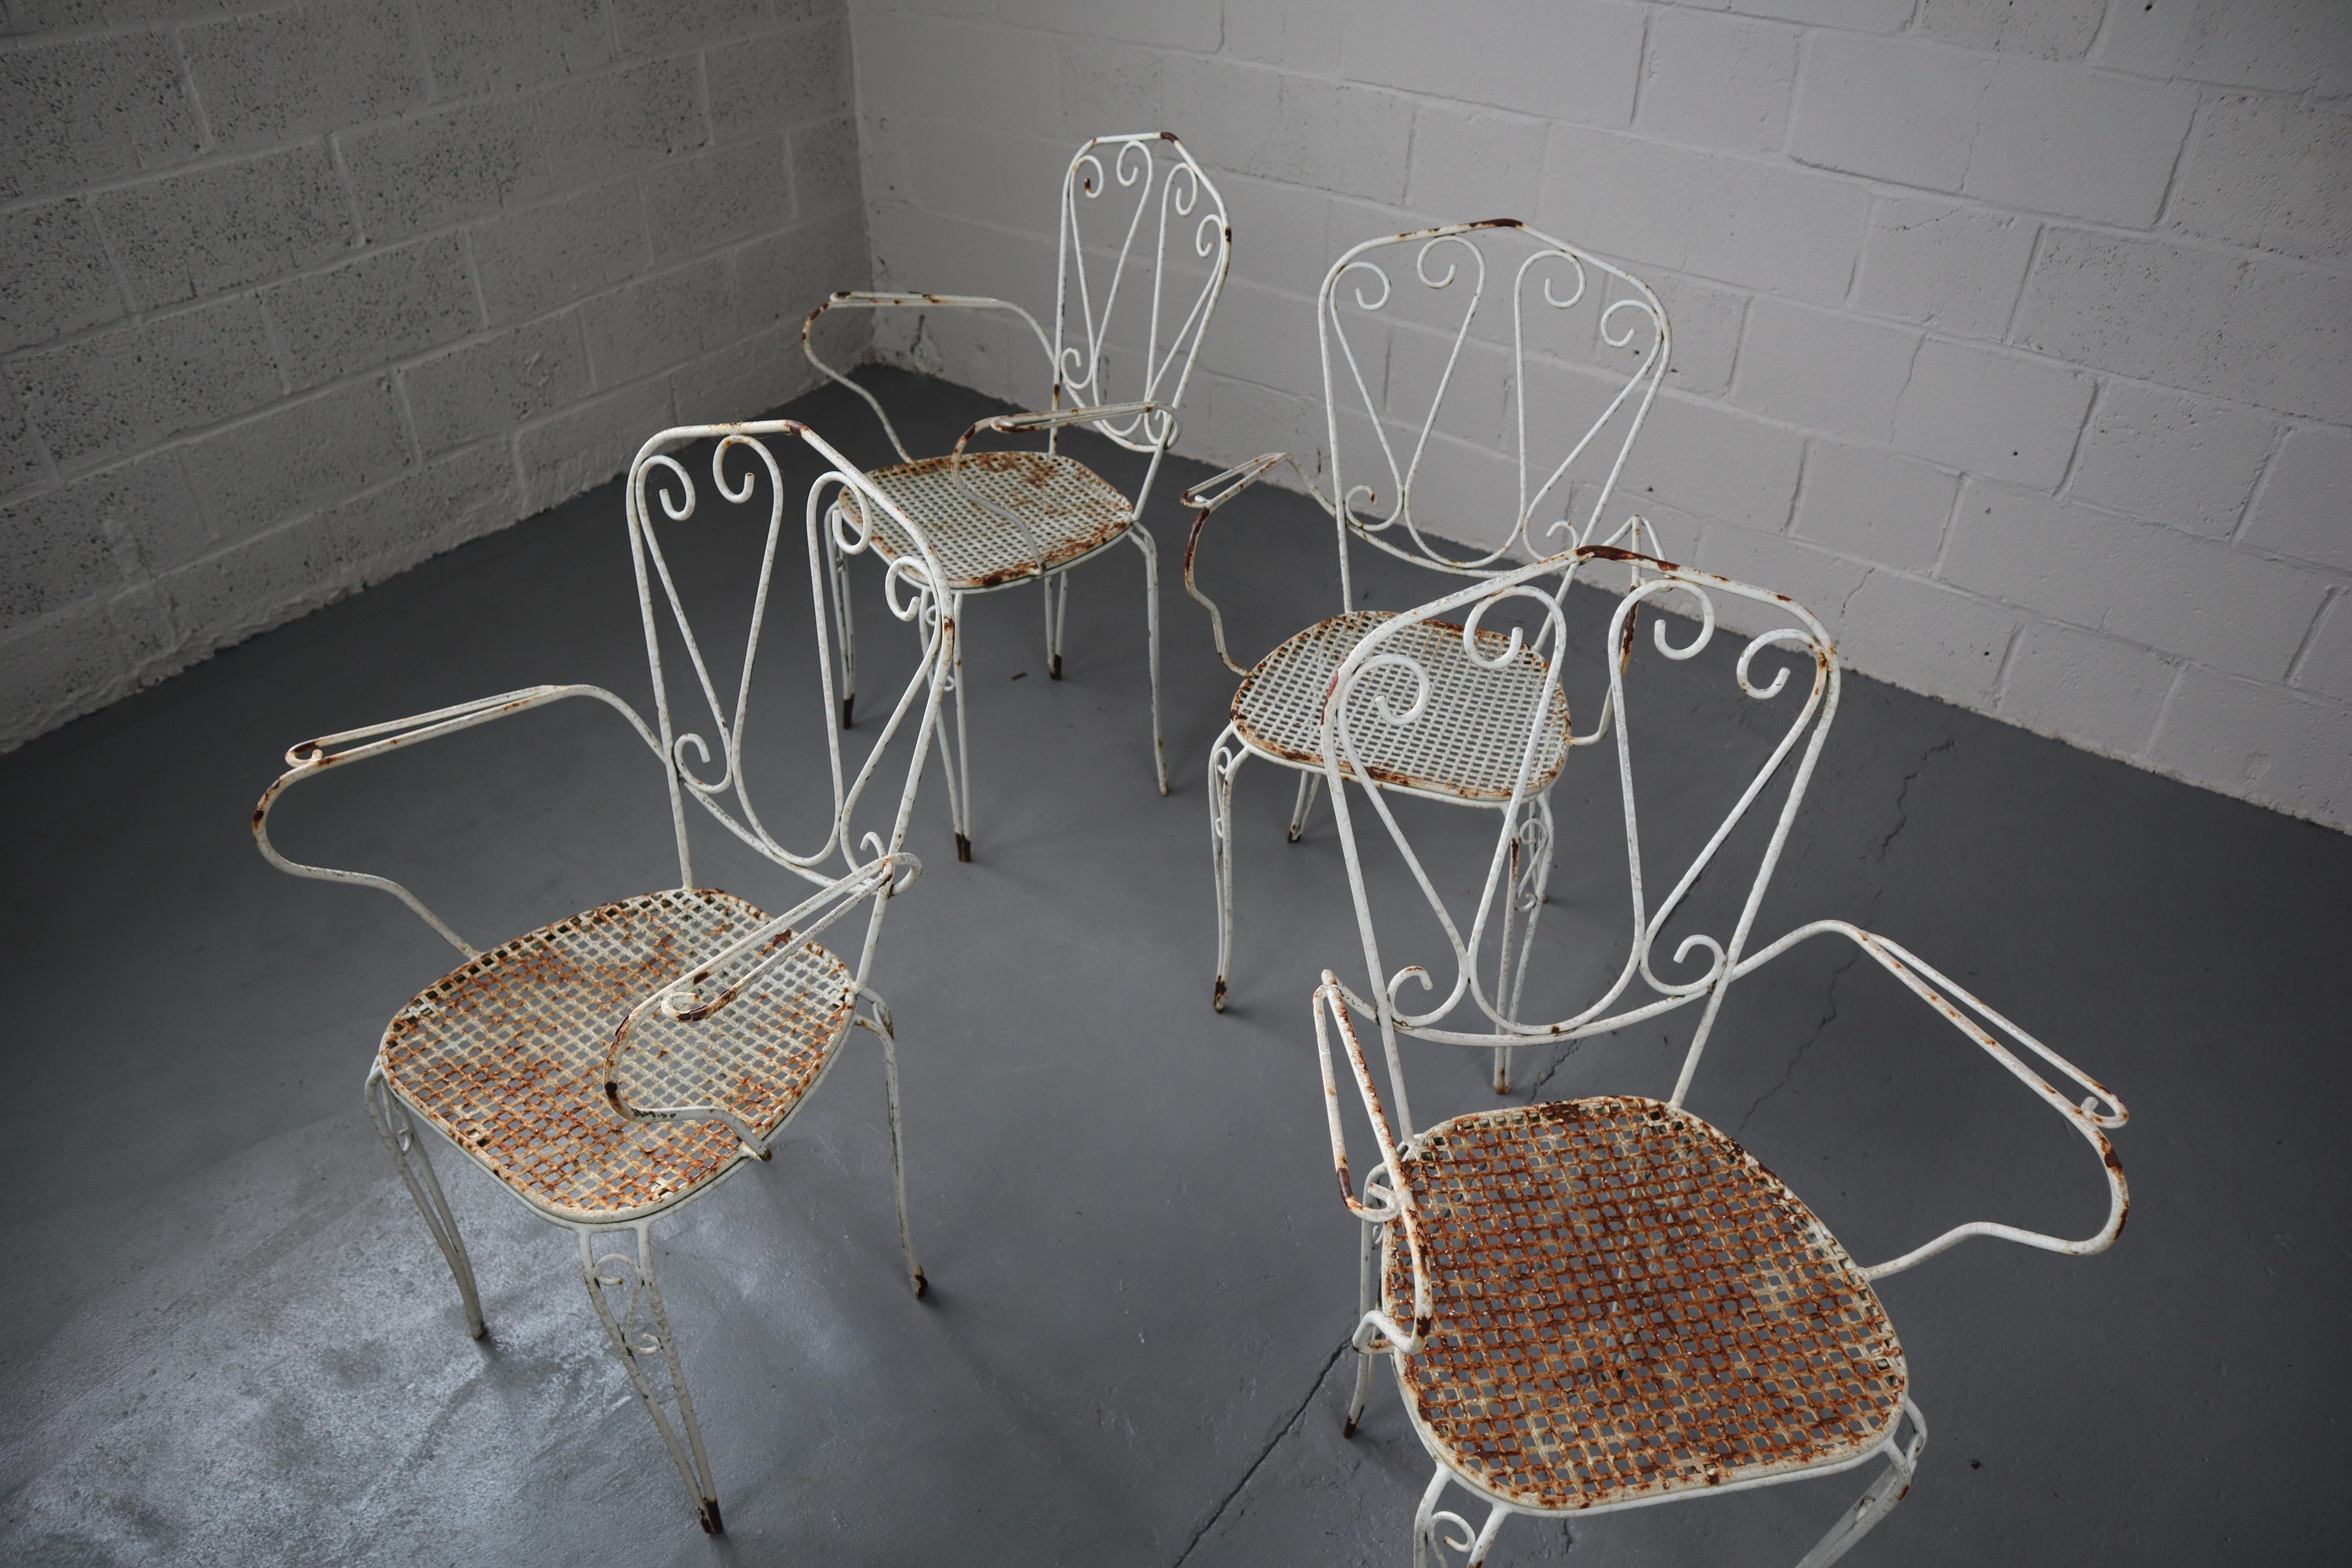 Set of 4 garden chairs in white painted wrought iron. The round seat is perforated. The back has decorative curls. The legs are slightly arched.
With a Classic vintage look from France, nicely weathered!